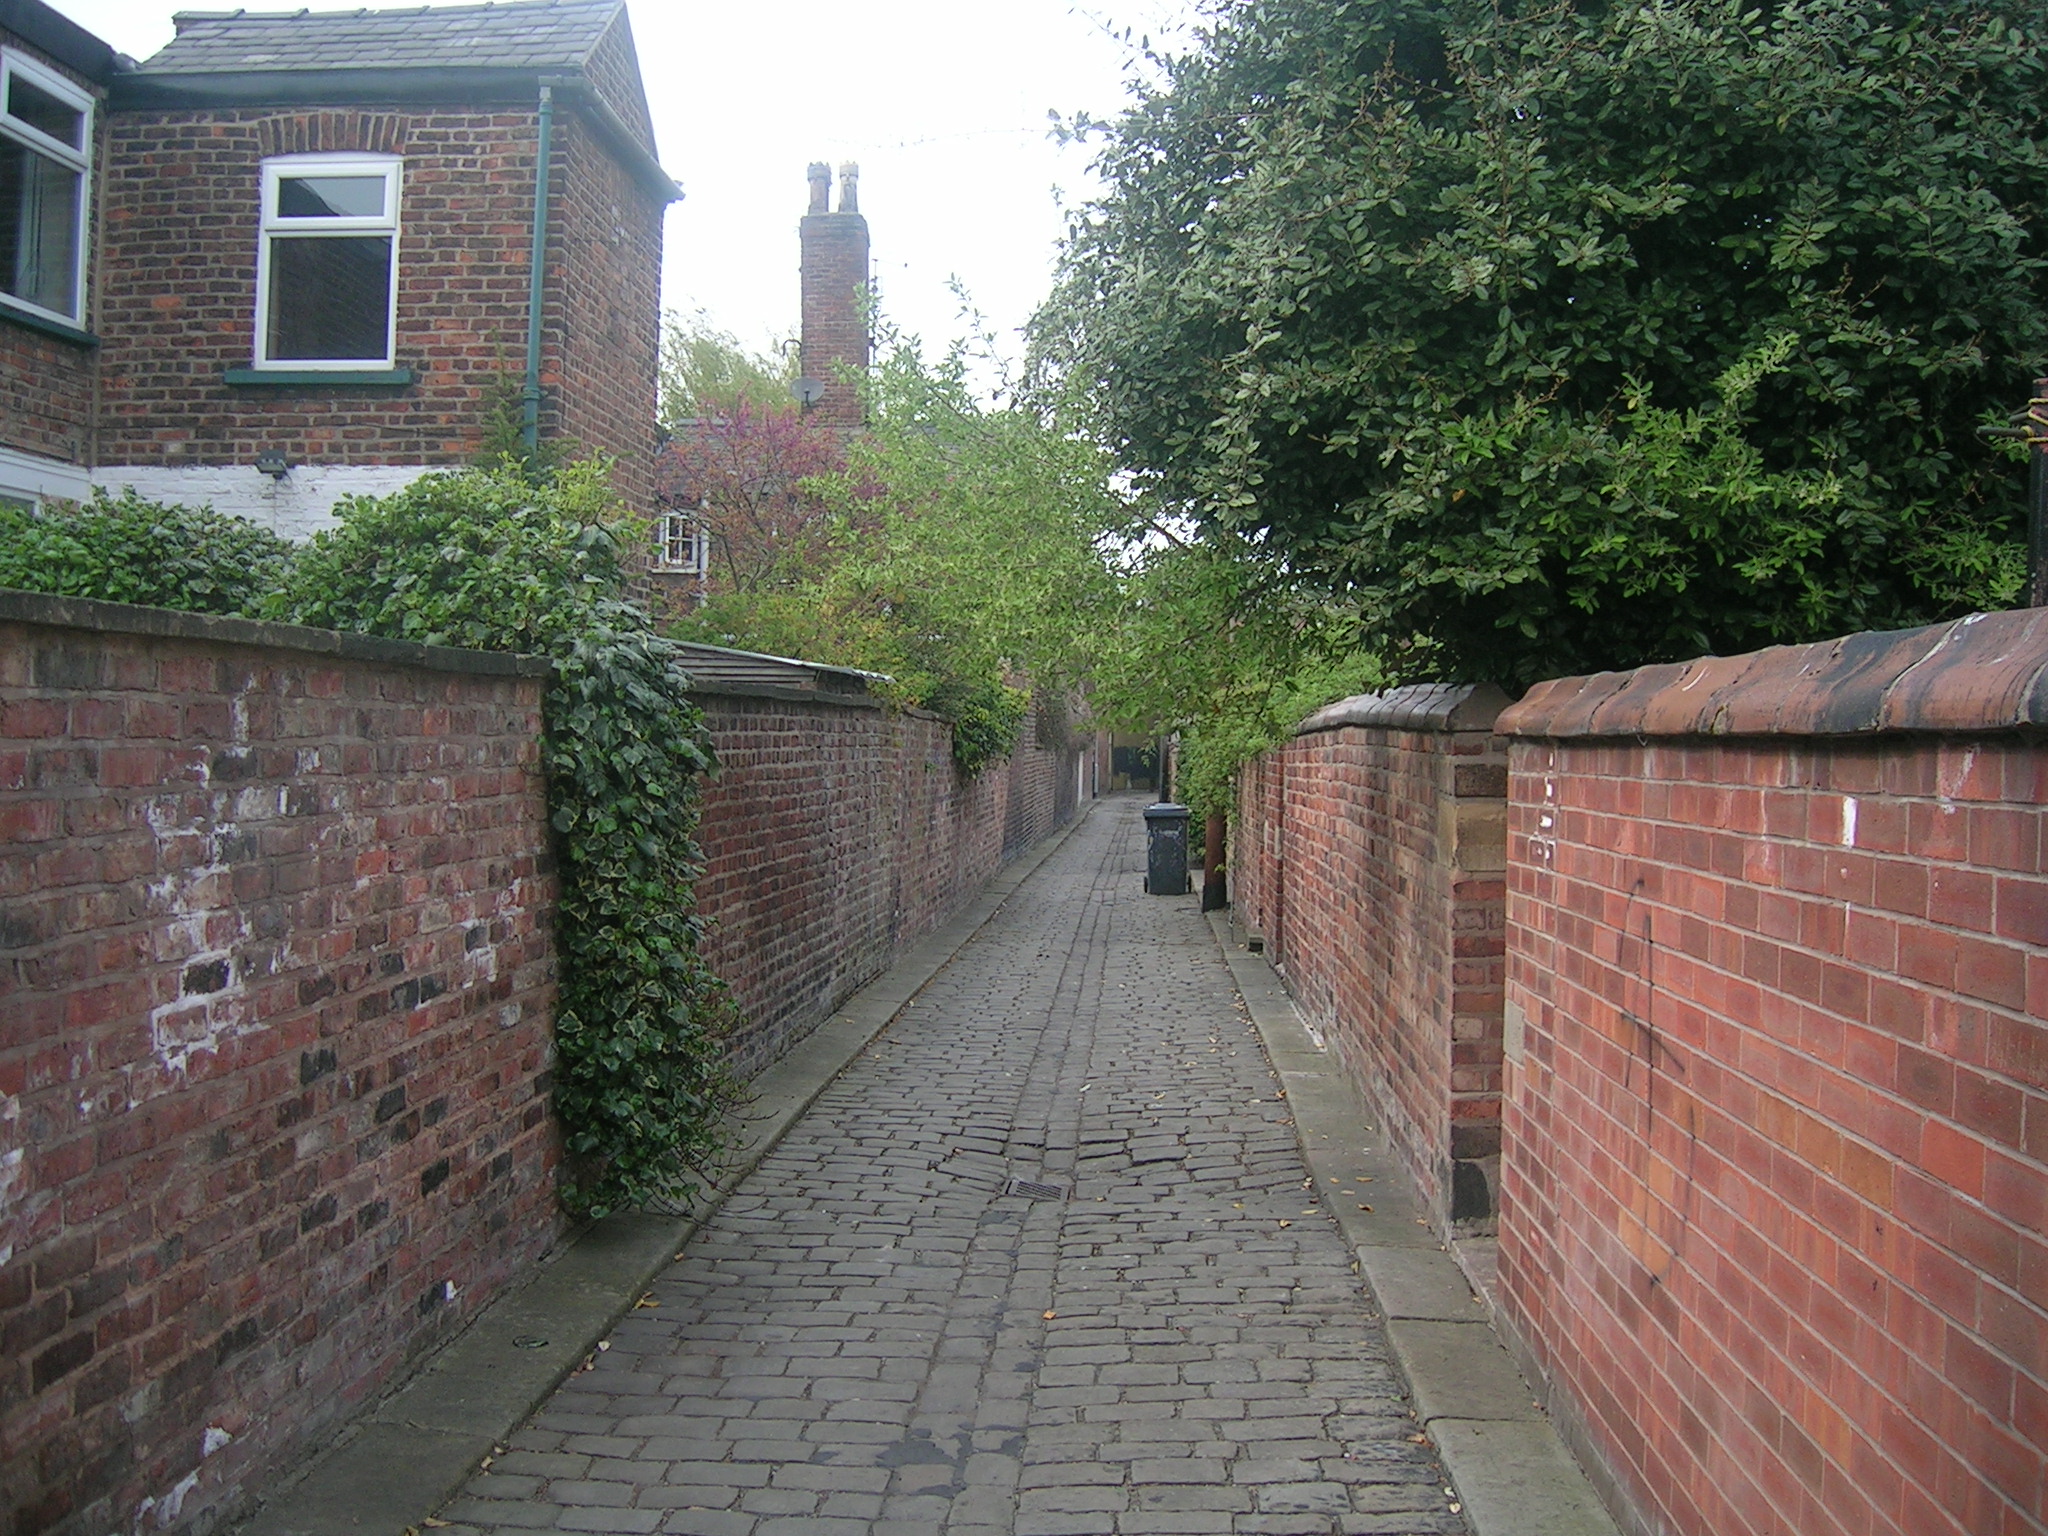 a brick path between two houses with hedges on either side